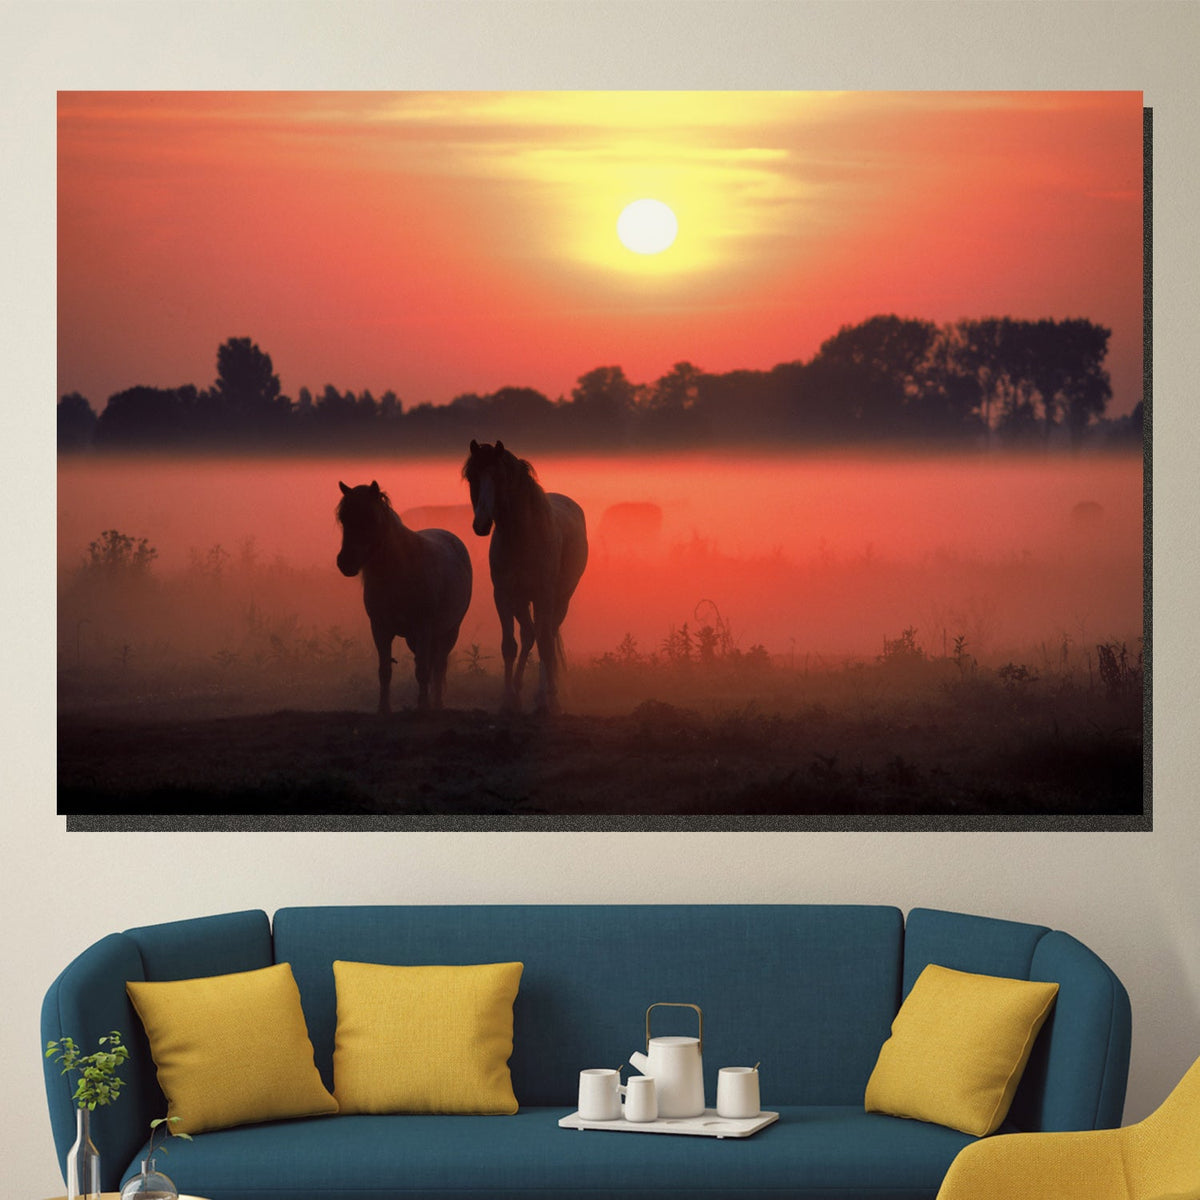 https://cdn.shopify.com/s/files/1/0387/9986/8044/products/APairofHorsesCanvasArtprintStretched-1.jpg